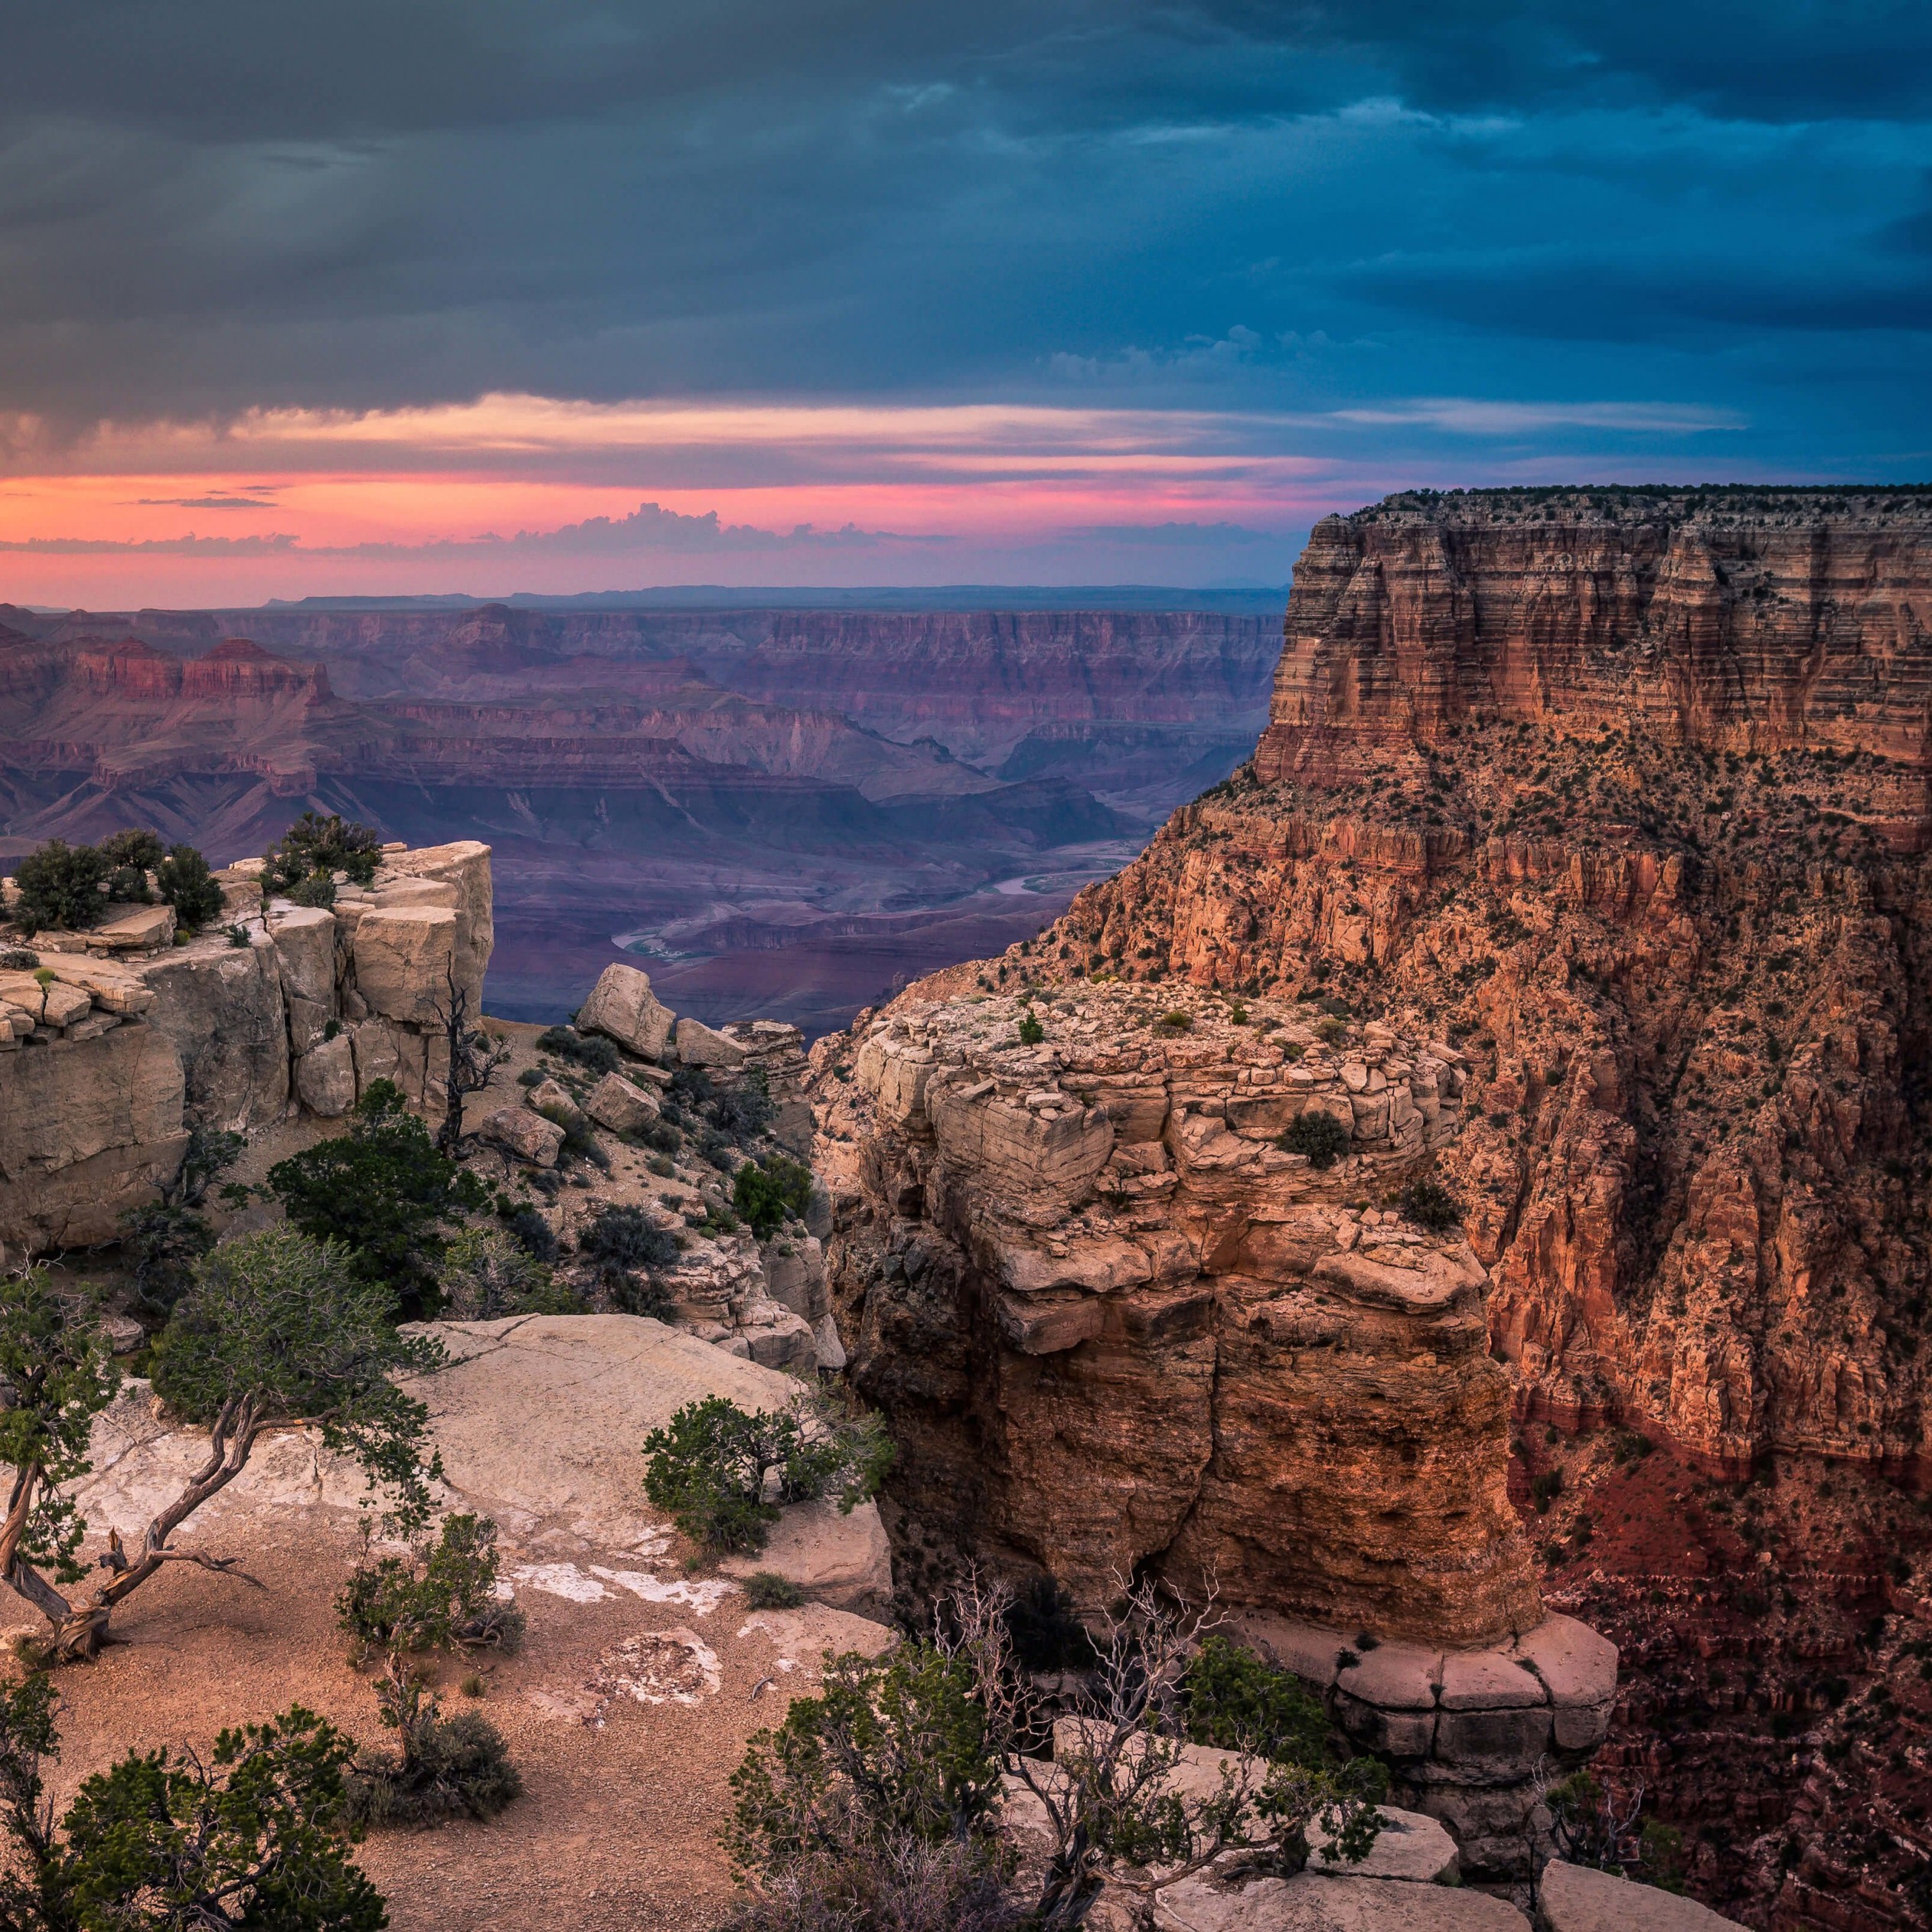 Sunset At The Grand Canyon Wallpaper for Apple iPad 4